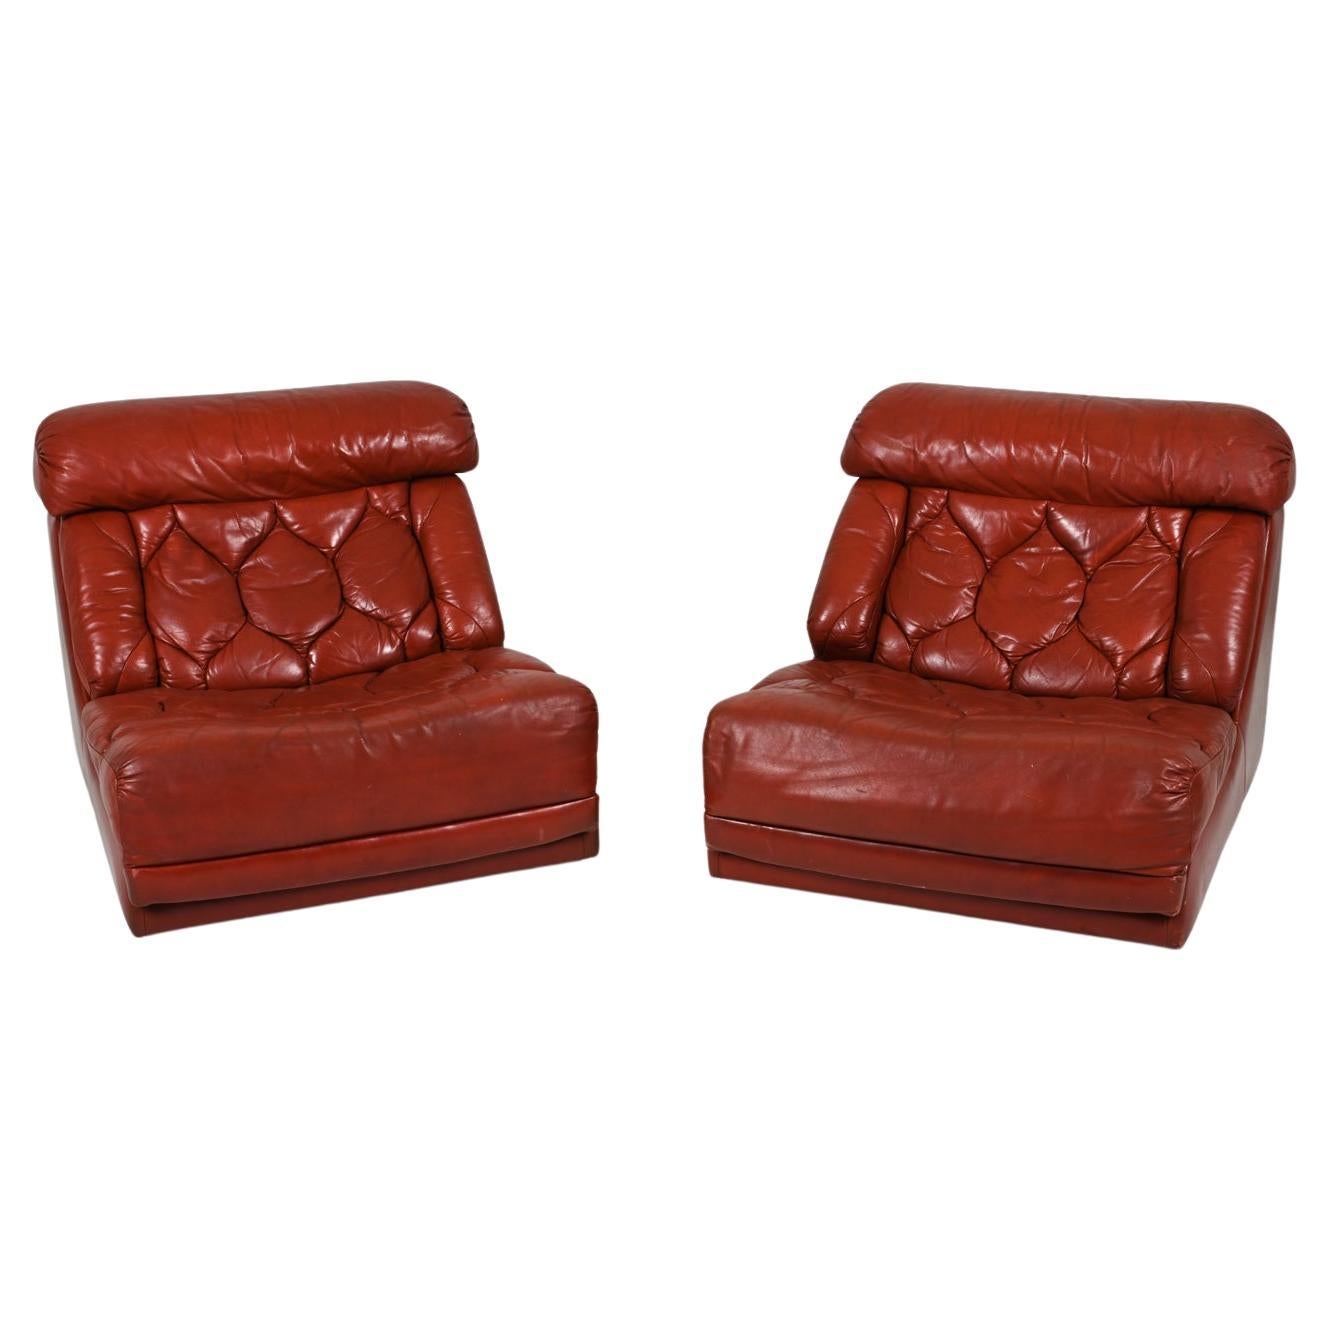 Pair of British Space Age Modular Leather Lounge Chairs by Tetrad For Sale